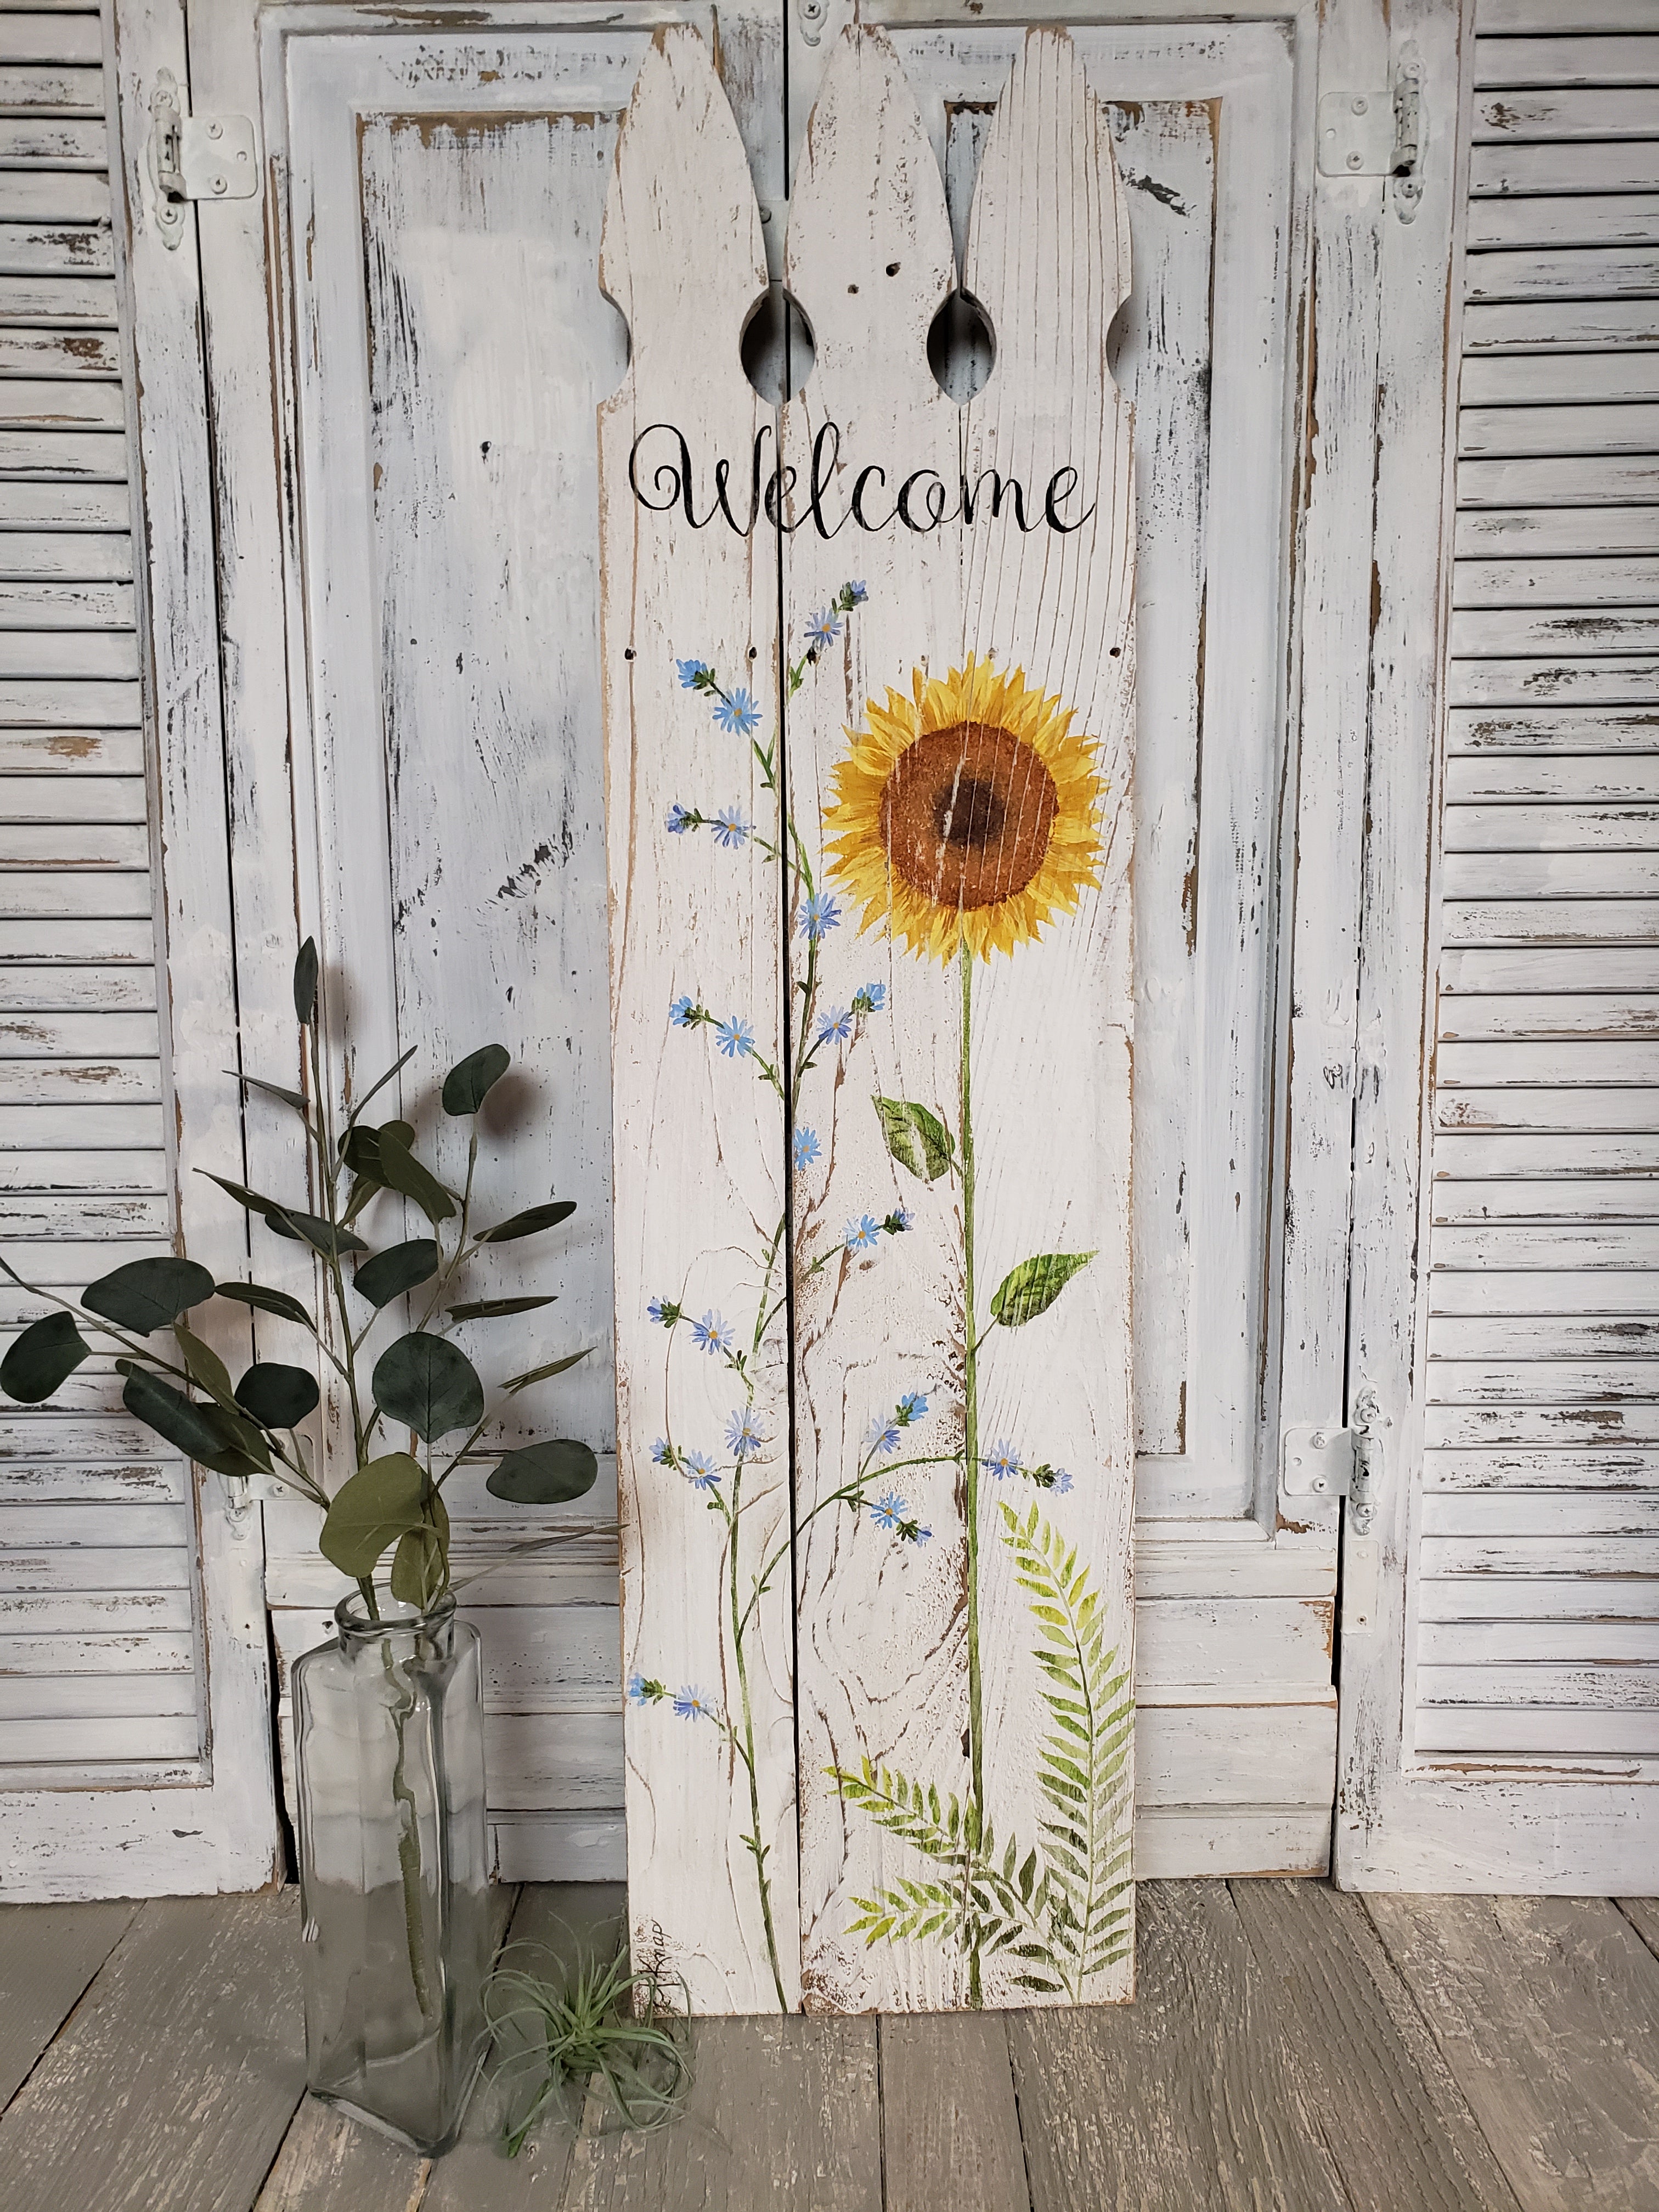 Welcome sunflower sign, Picket fence with Wild flowers painted on pallet wood, White washed Farmhouse decor